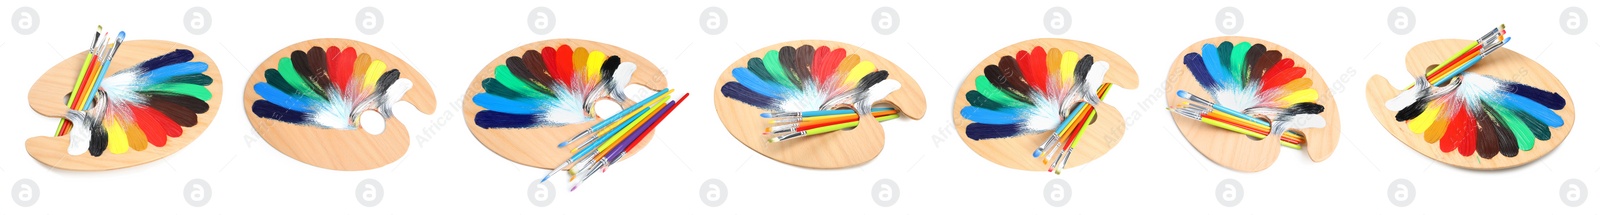 Image of Palettes with paints and brushes on white background, collage. Banner design